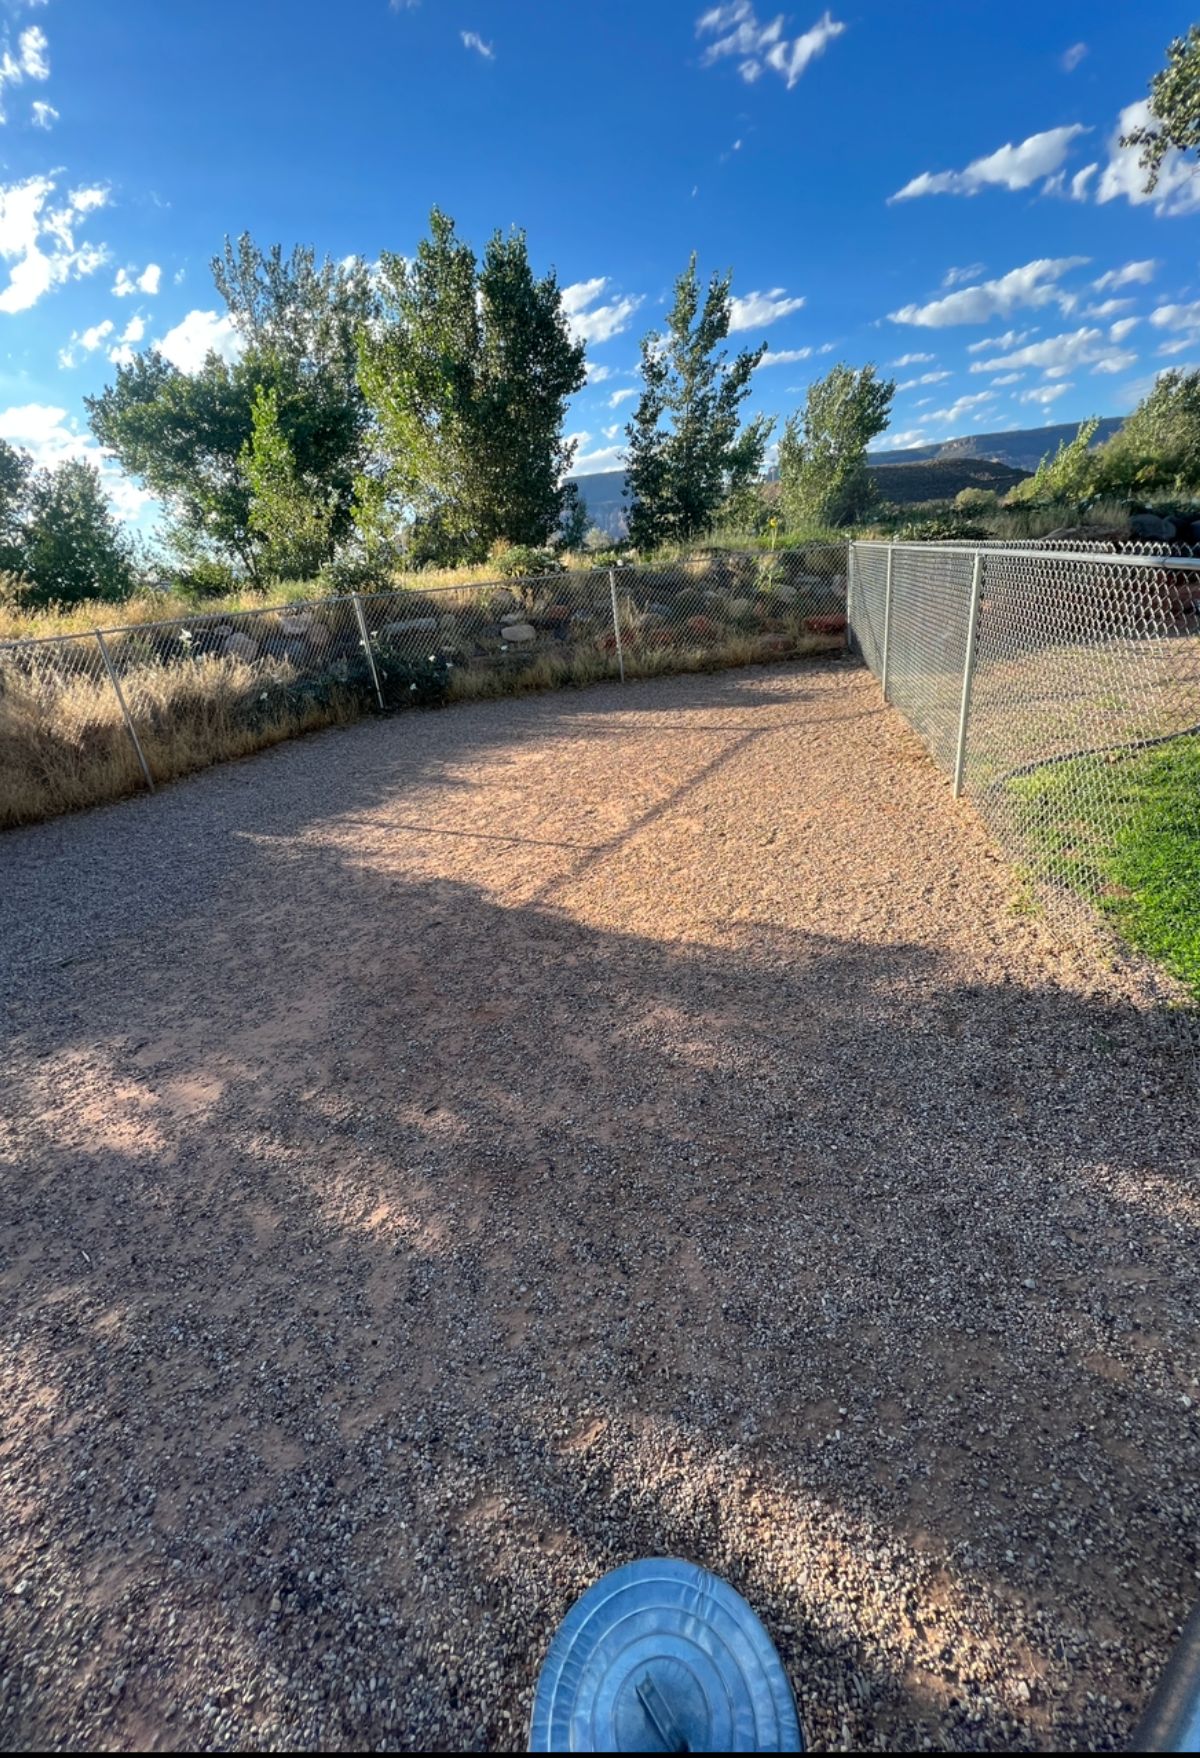 A gravel dog park with a fence in the background.